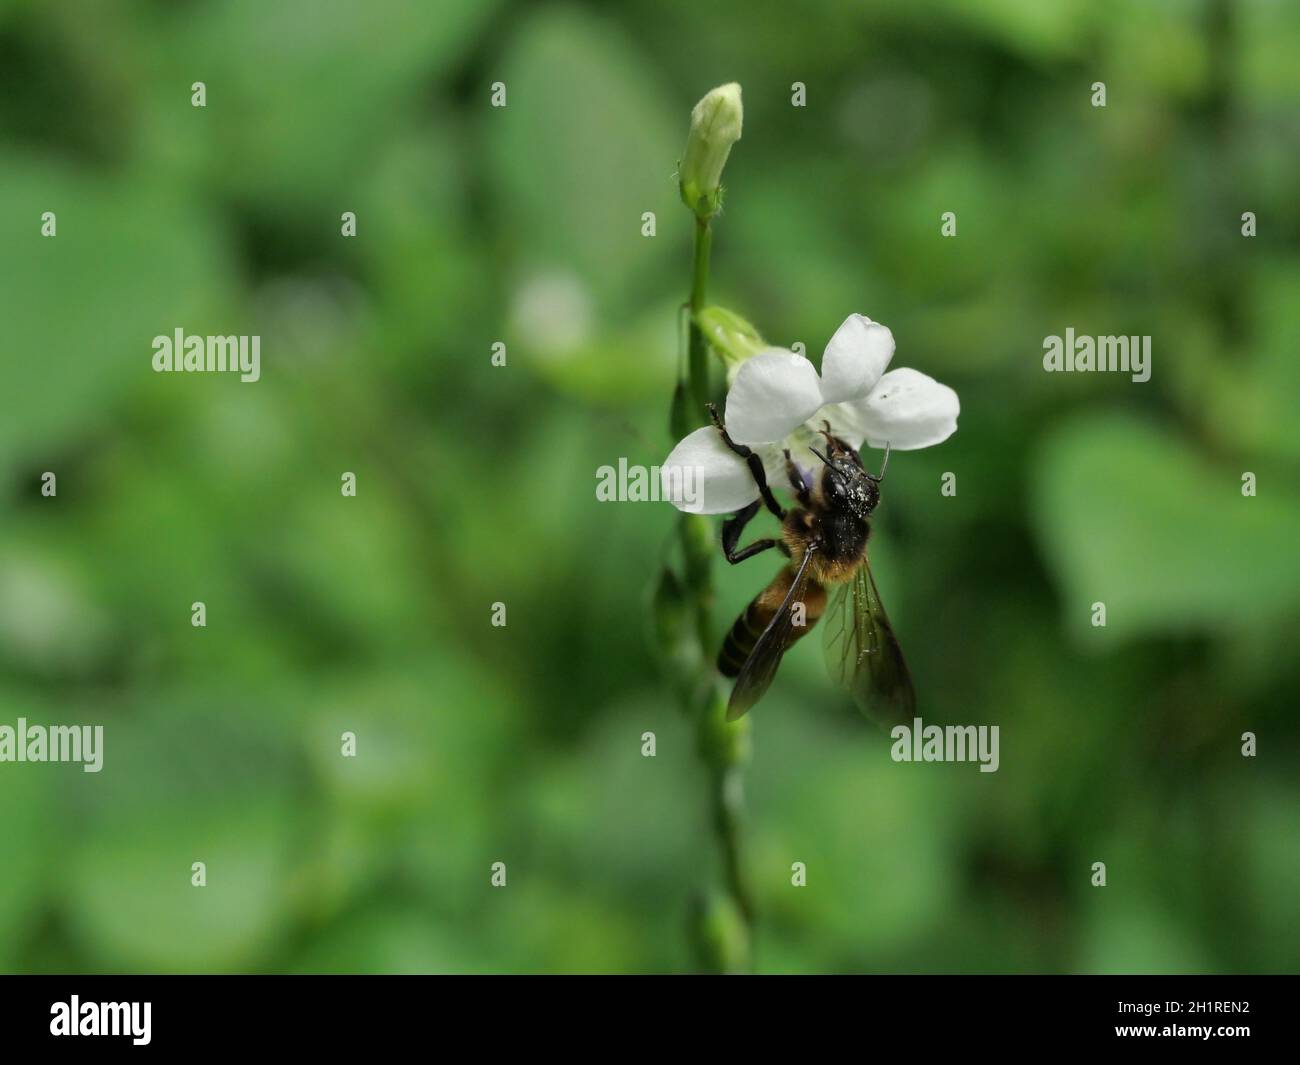 Giant honey bee seeking nectar on white Chinese violet or coromandel or creeping foxglove ( Asystasia gangetica ) blossom in field with natural green Stock Photo